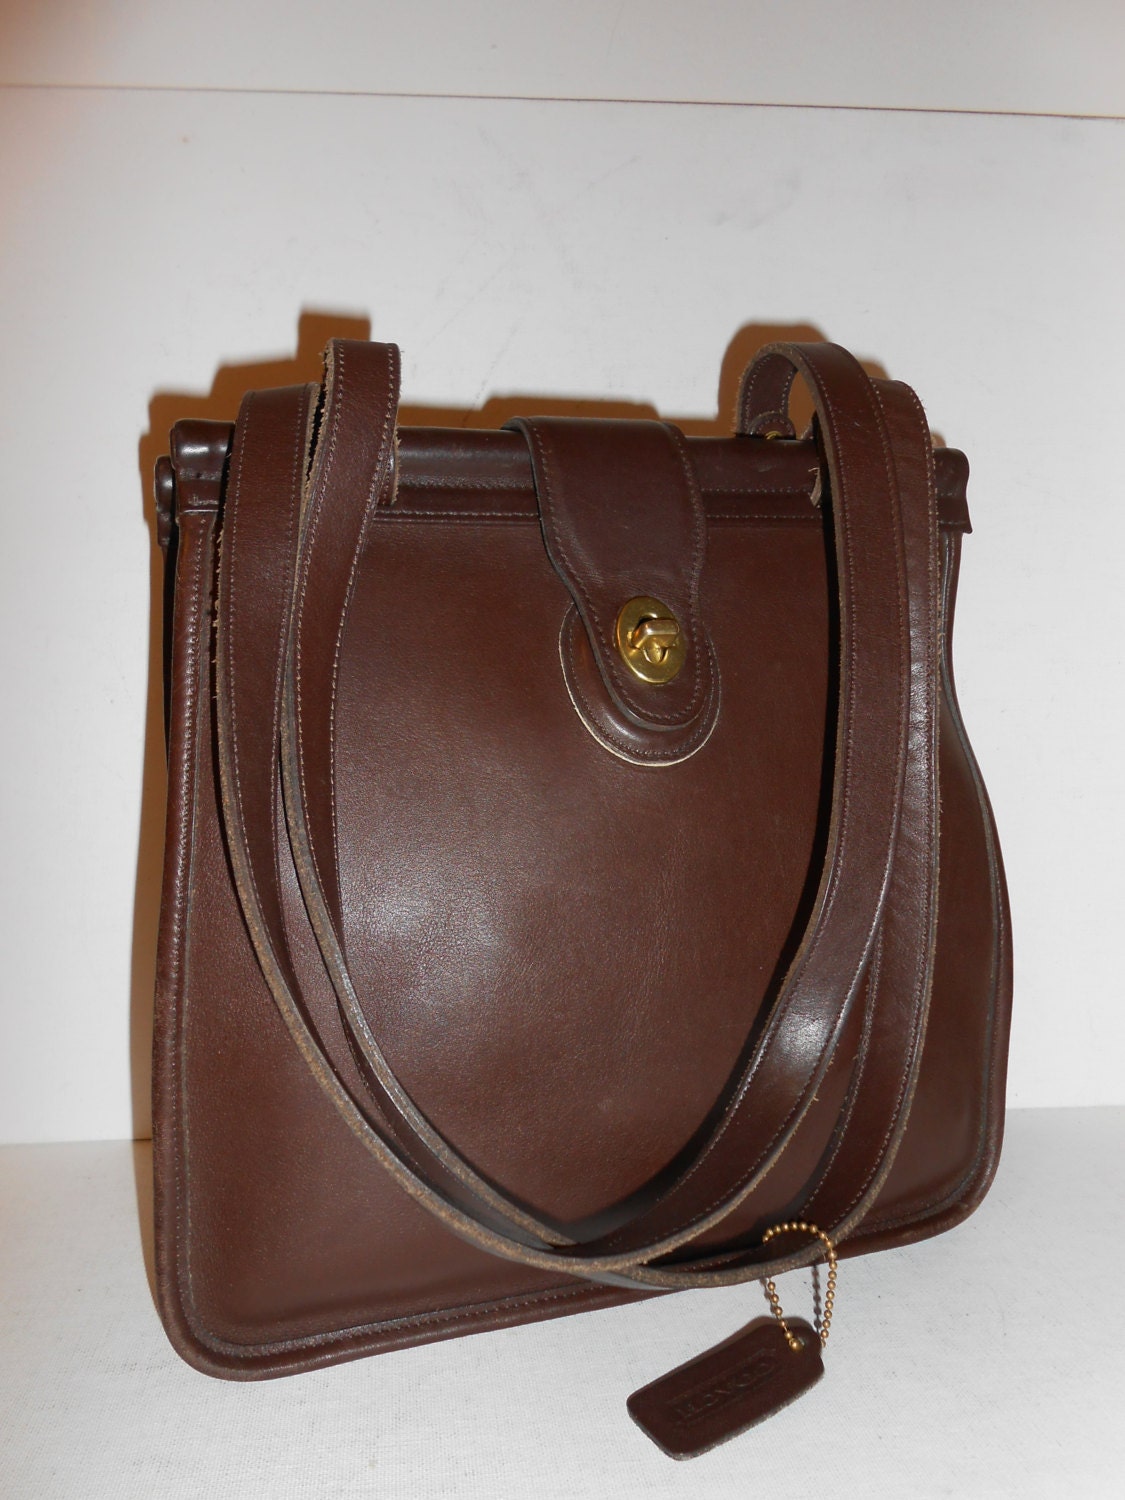 Womens Authentic Coach Dark Brown Leather Handbag with Handle